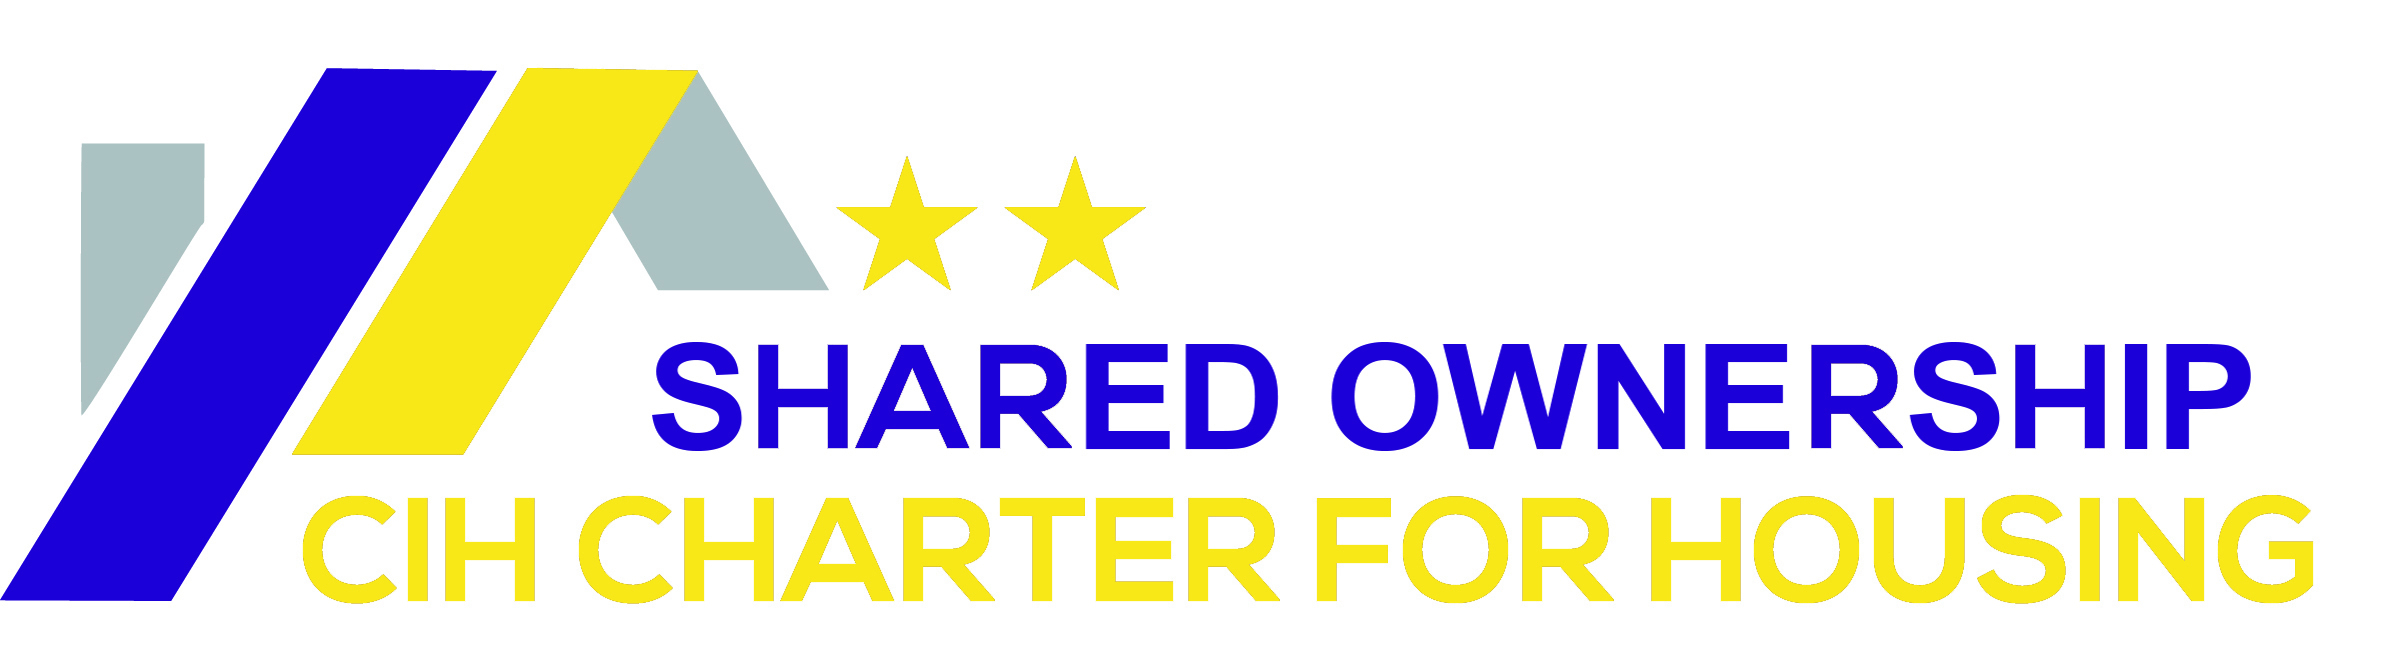 Shared ownership charter logo hires 2